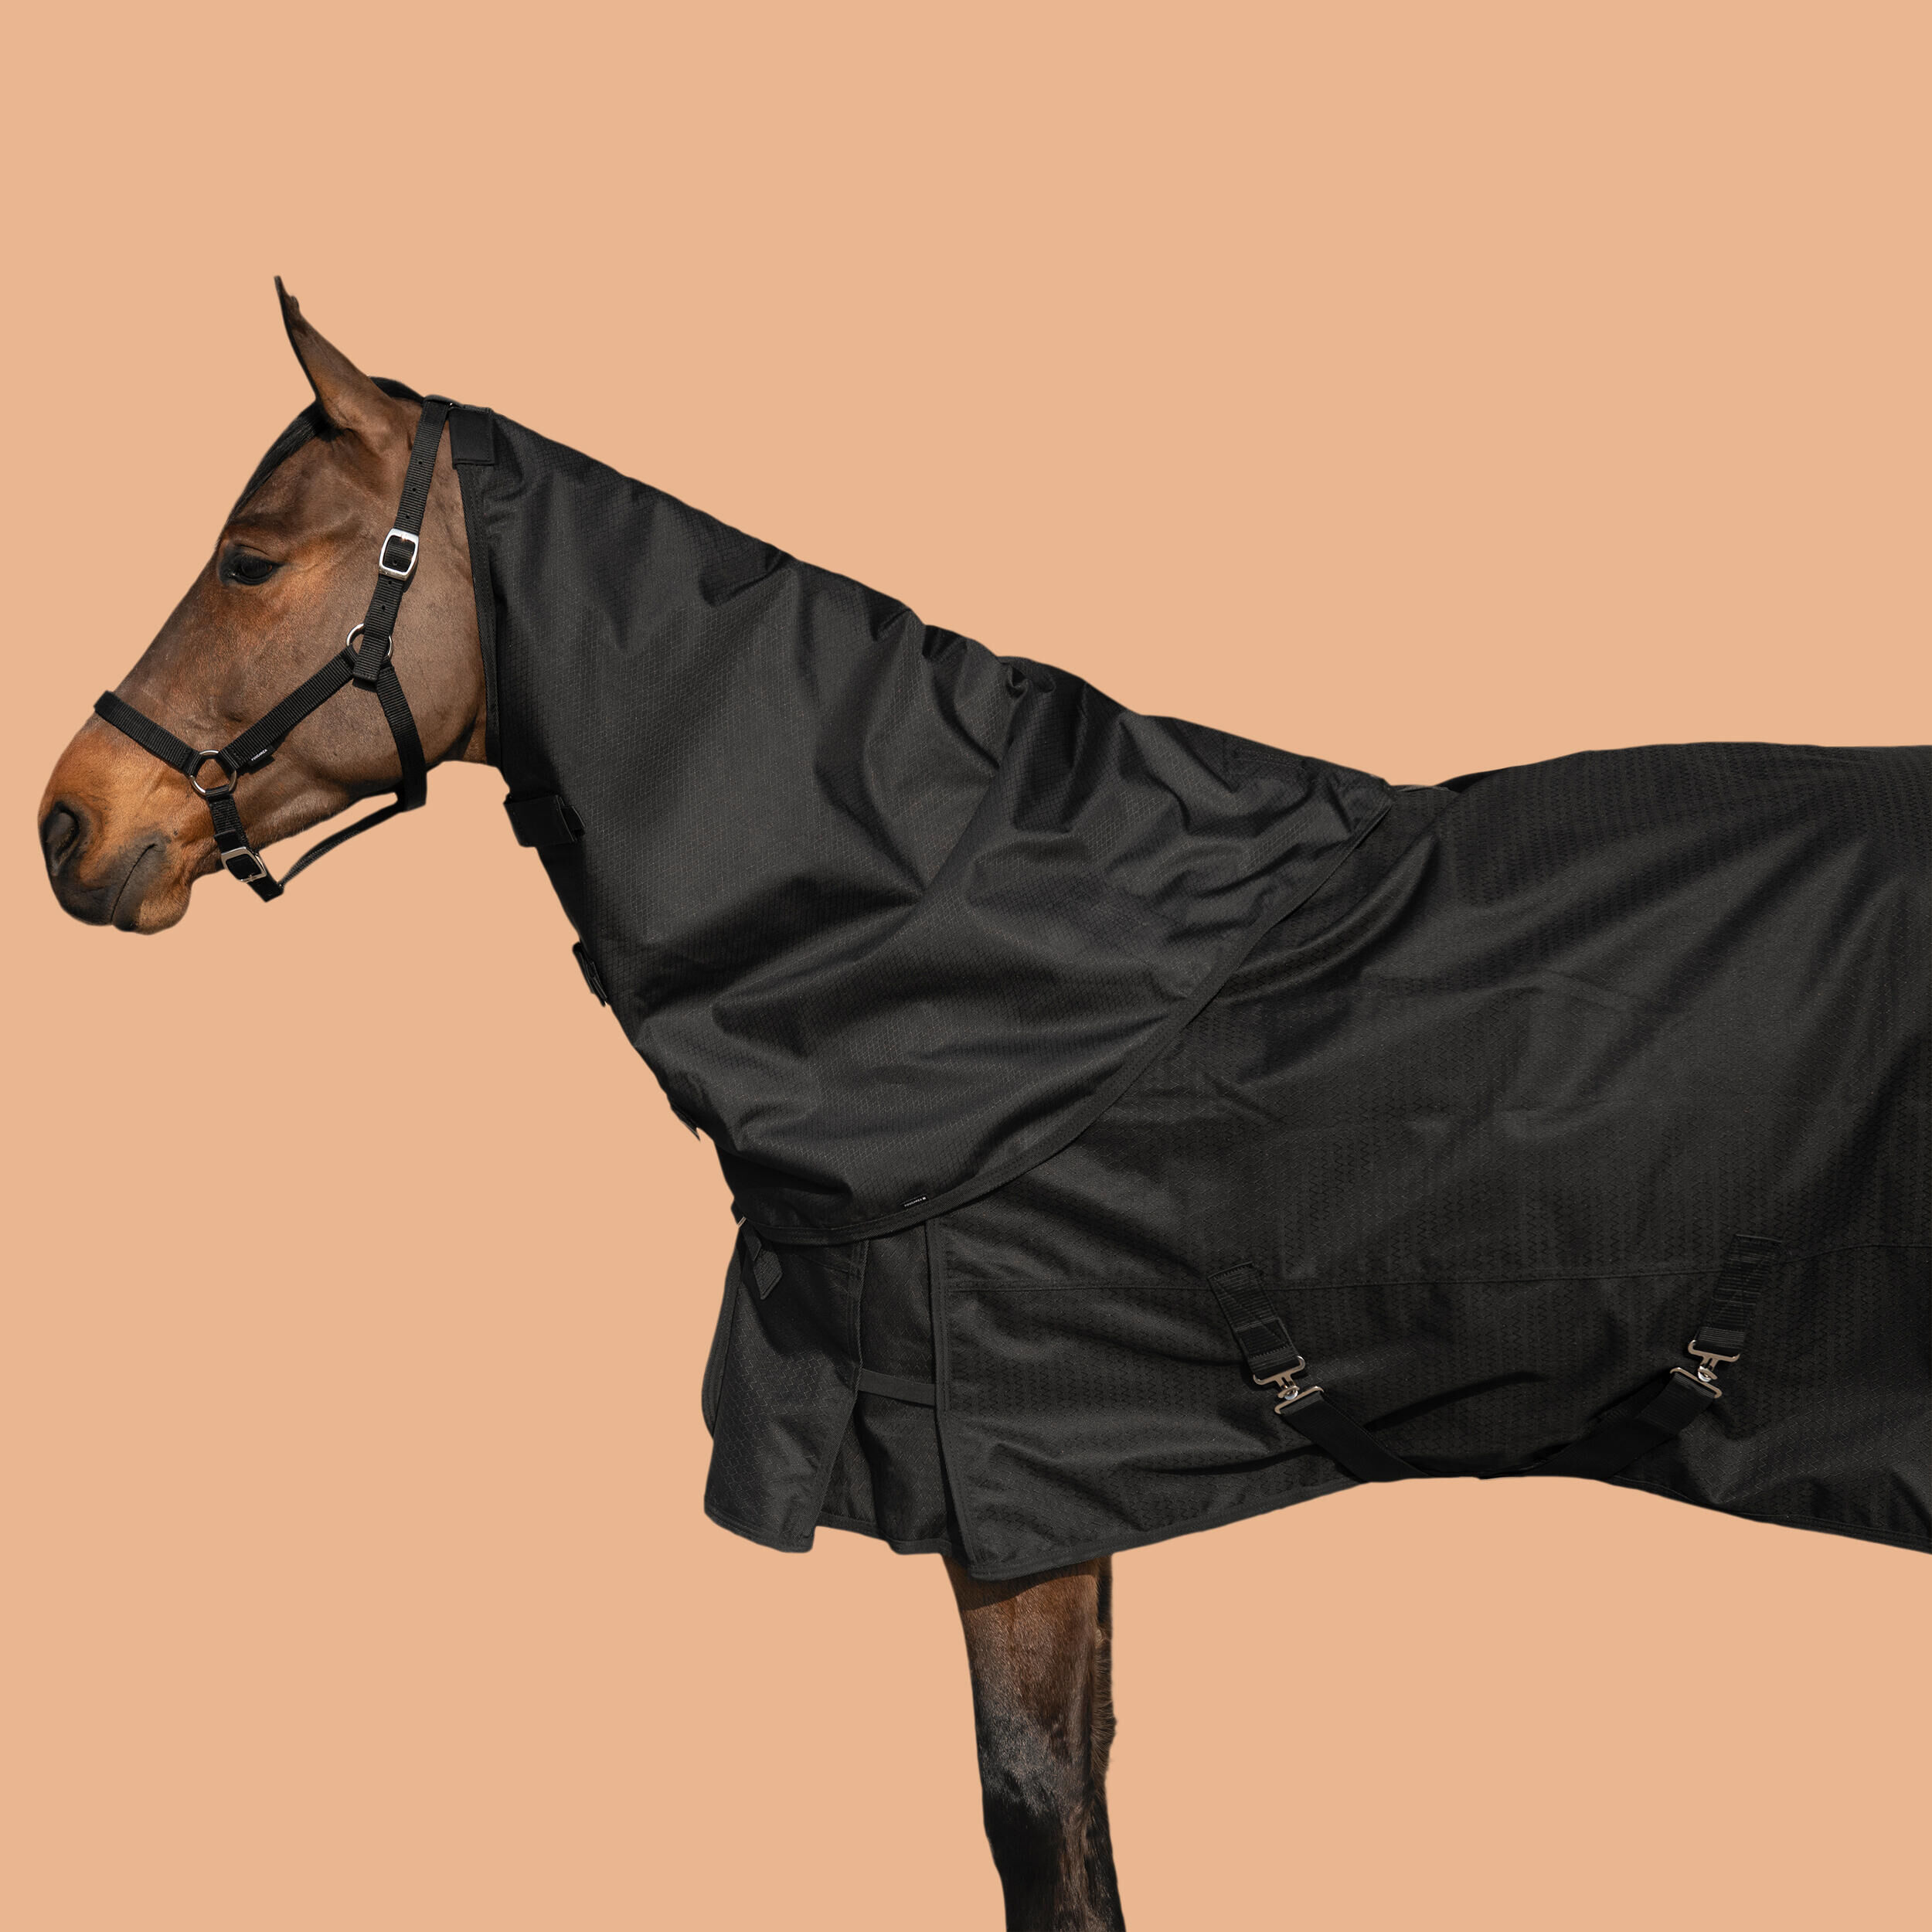 FOUGANZA Horse Riding Waterproof Neck Cover Allweather Light - Black